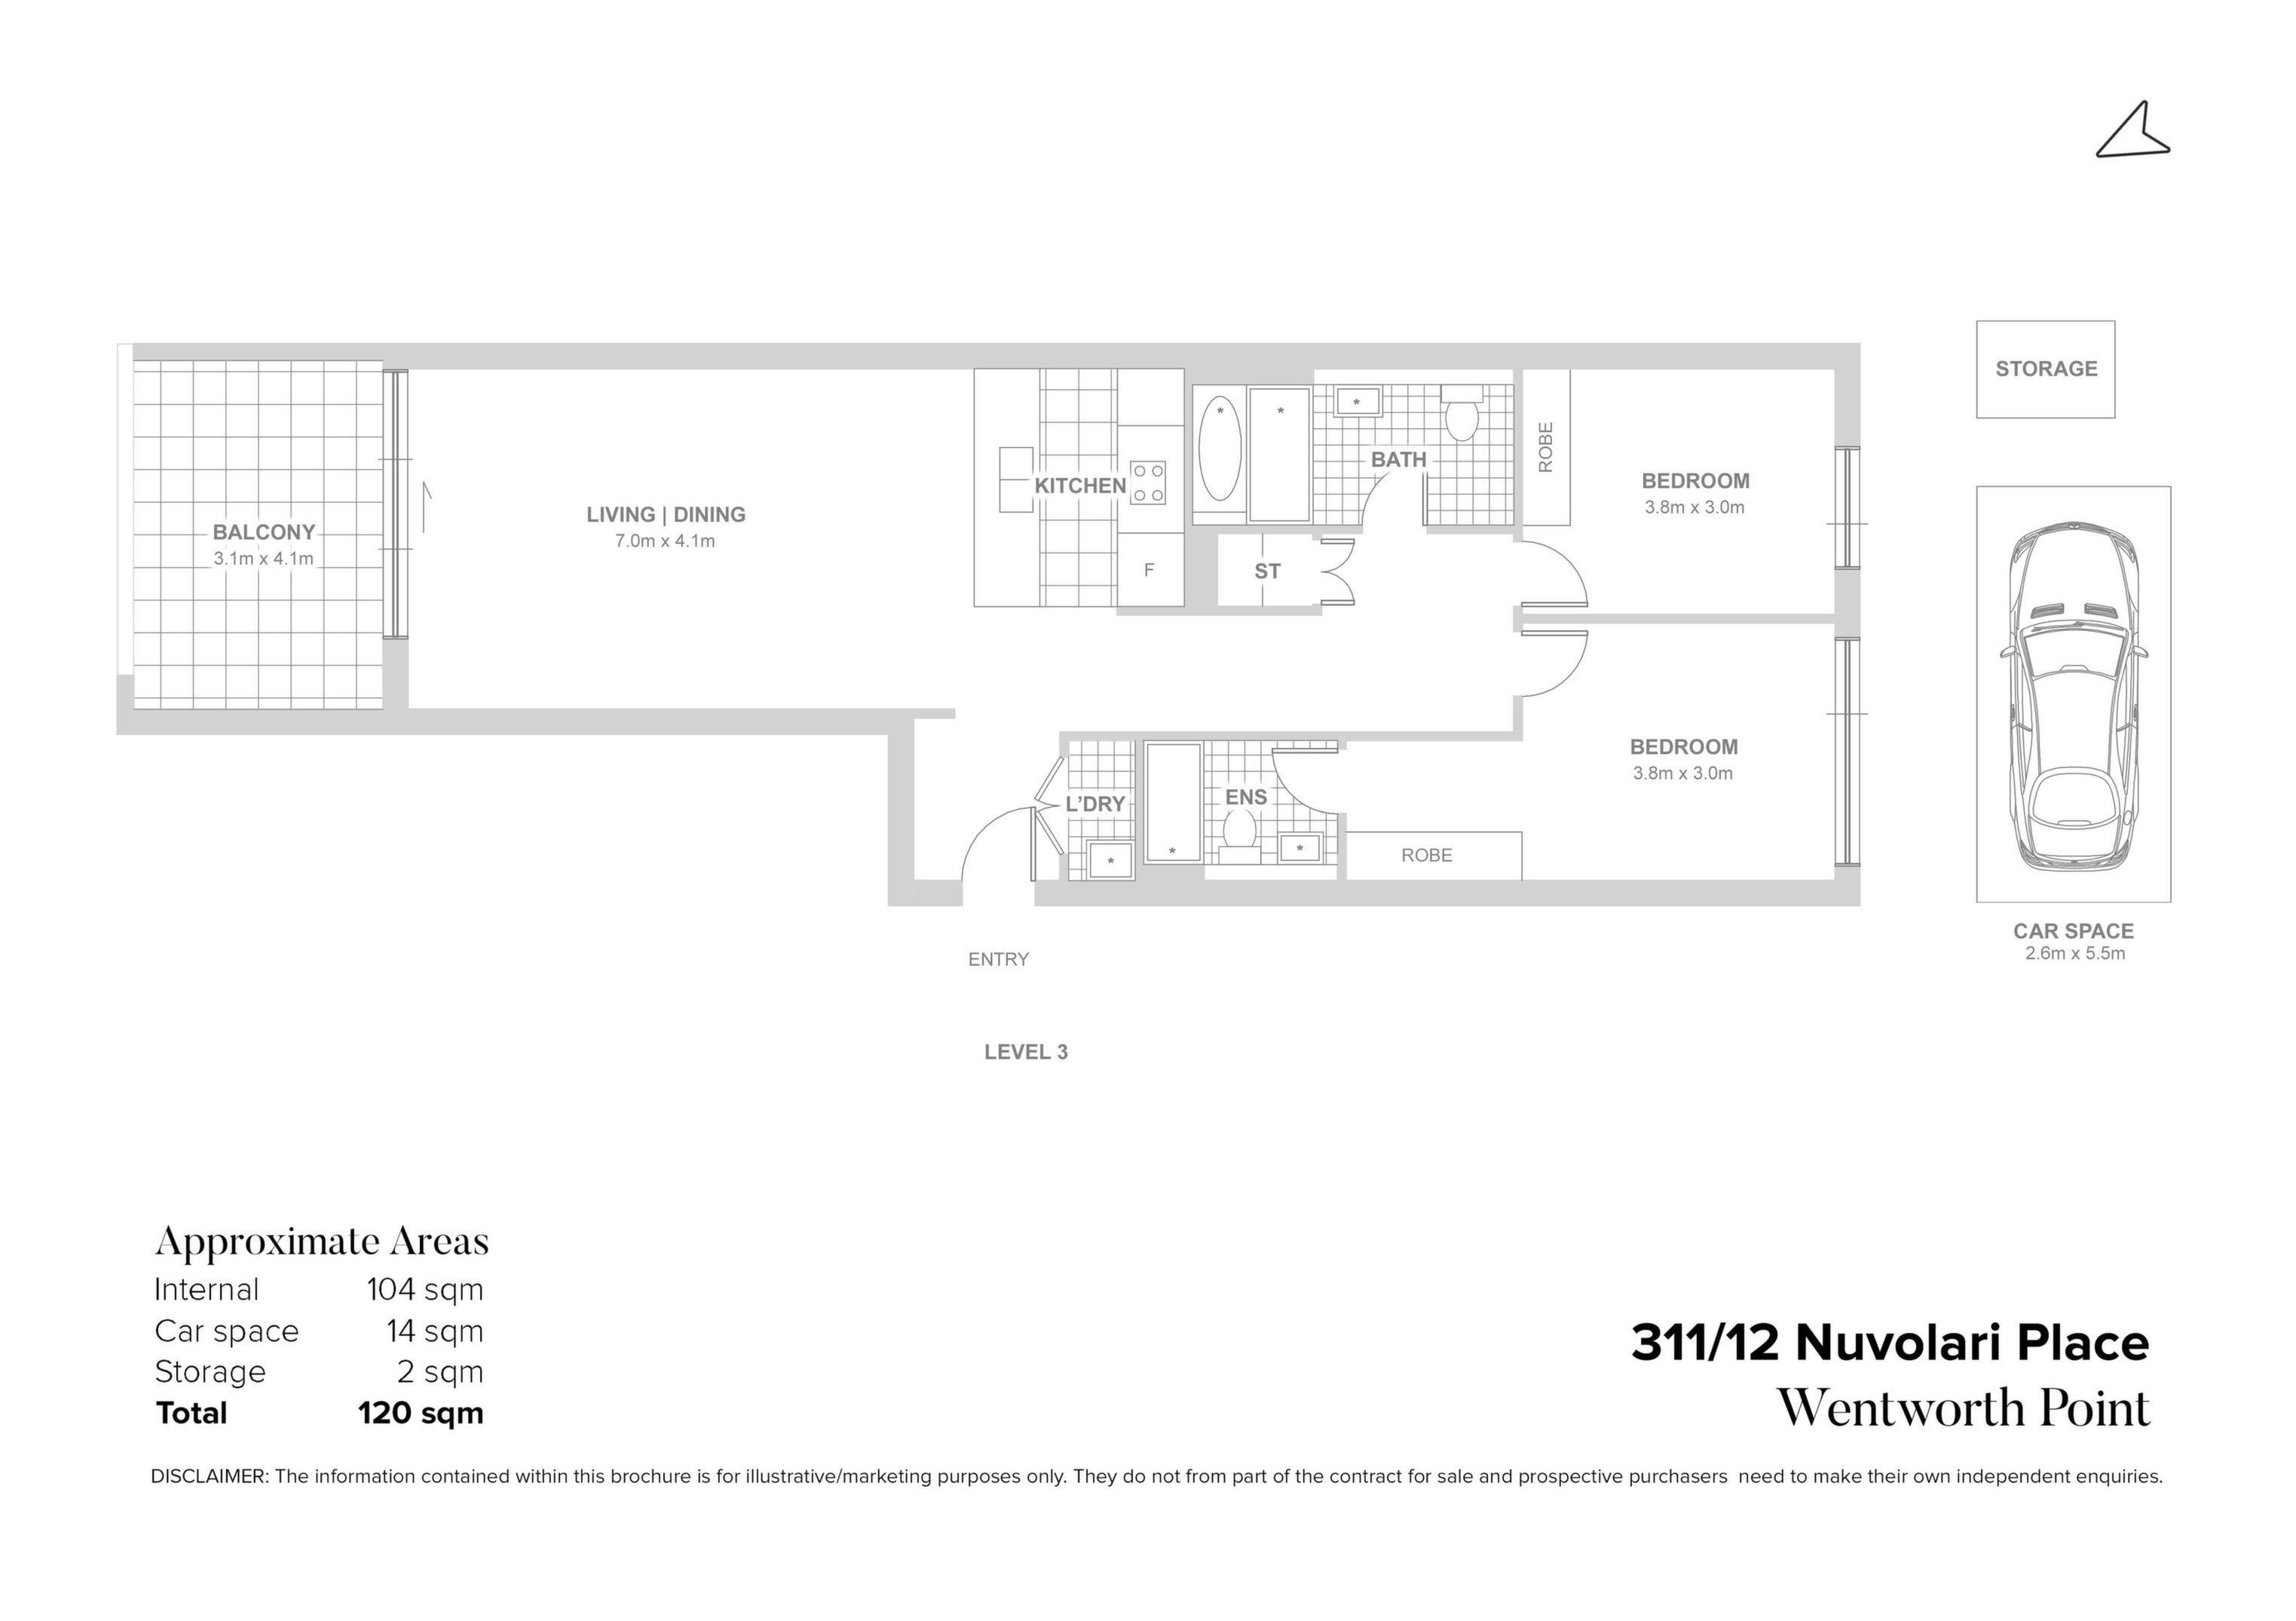 311/12 Nuvolari Place, Wentworth Point Sold by Chidiac Realty - floorplan